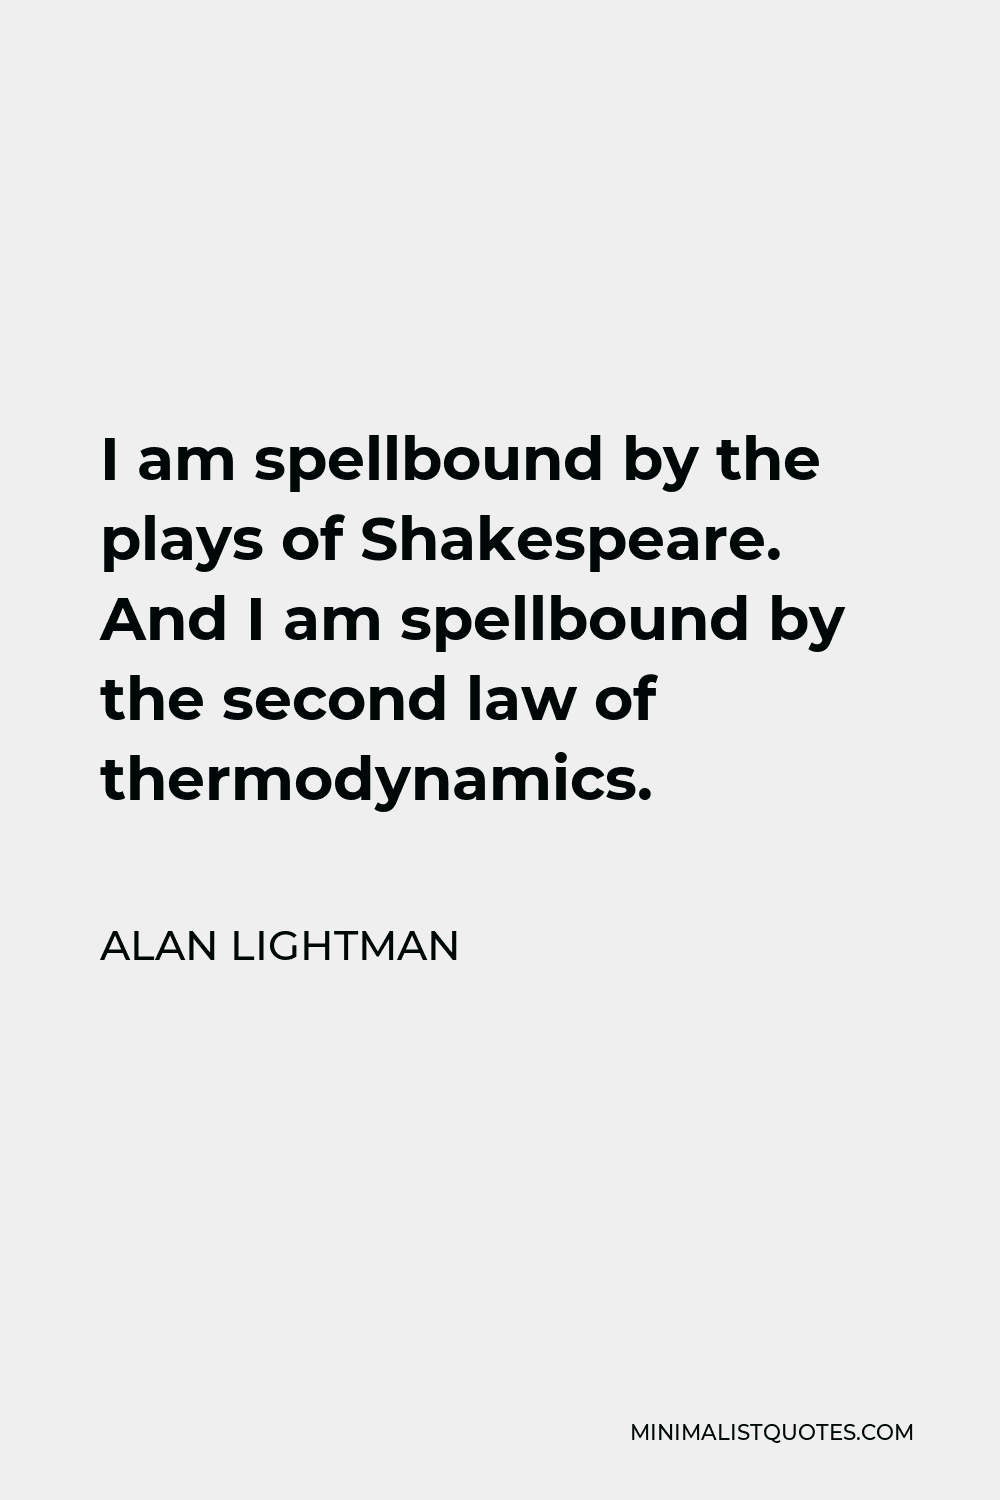 Alan Lightman Quote - I am spellbound by the plays of Shakespeare. And I am spellbound by the second law of thermodynamics.